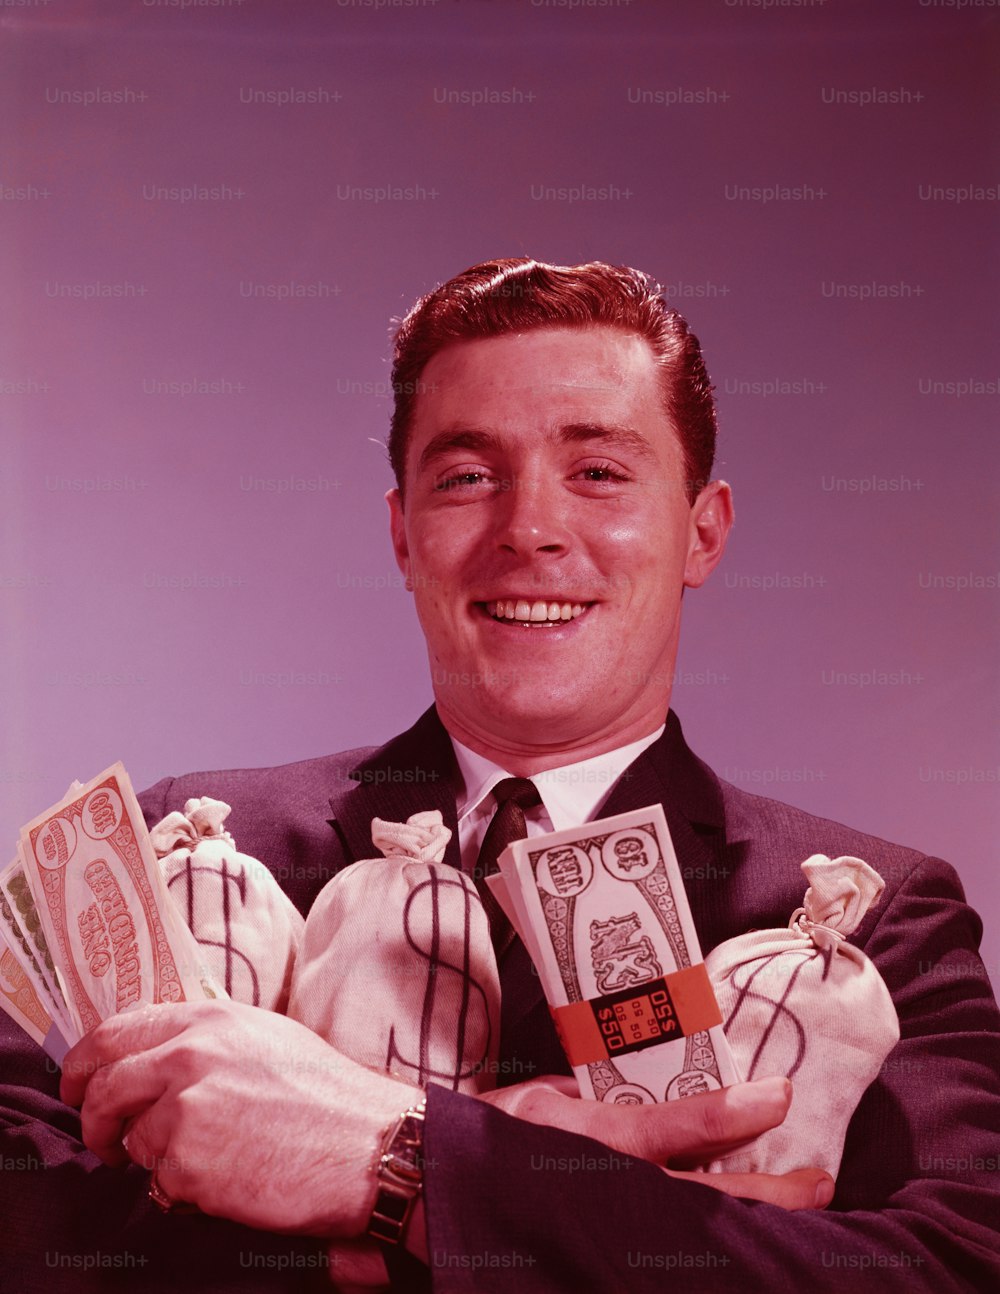 UNITED STATES - CIRCA 1960s:  Man holding bundles and bags of money, smiling, portrait.